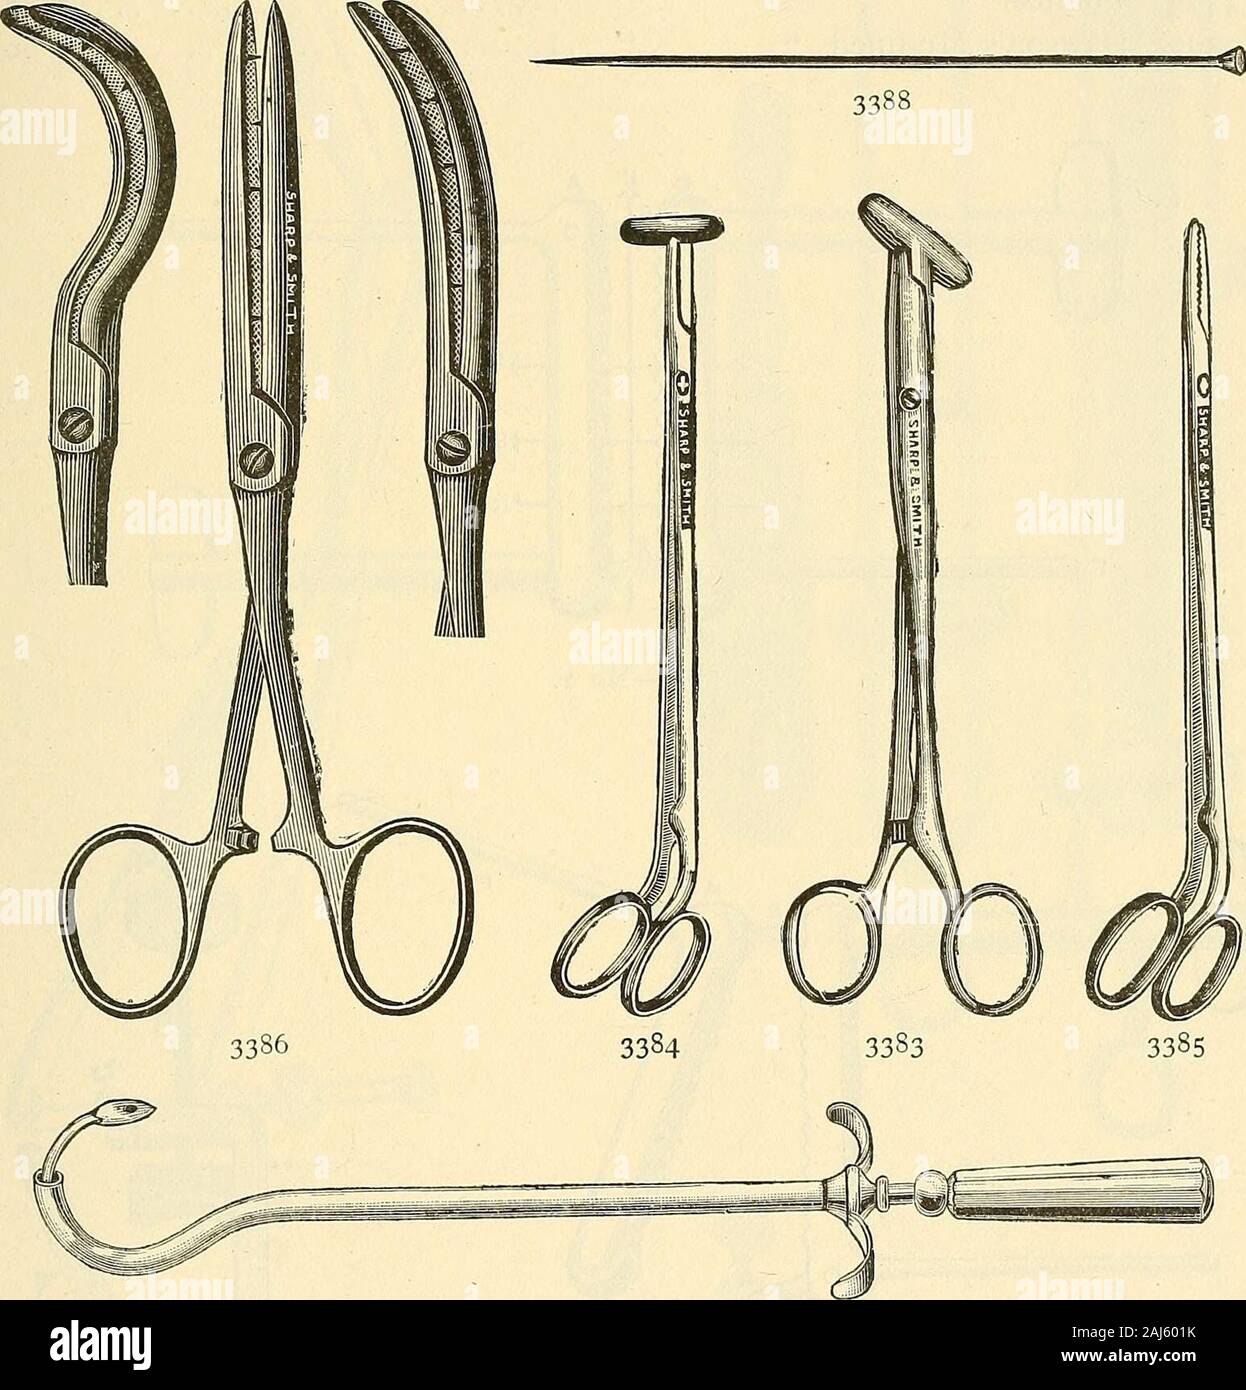 Catalogue of Sharp & Smith : importers, manufacturers, wholesale and retail dealers in surgical instruments, deformity apparatus, artificial limbs, artificial eyes, elastic stockings, trusses, crutches, supporters, galvanic and faradic batteries, etc., surgeons' appliances of every description . 3377 3376 3379 Instruments designated by a * are illustrated, 3381 SHARP & SMITH, CHICAGO. 589 GYNAECOLOGICAL—OVARIOTOMY. FIG. *3387 Dudleys Ovariotomy Pins each. $ 75 *3388 Pecks 60 *3389 Wilcoxs 50 3390 Kelloggs Silver per doz. 2 00 3391 Gold 300 *3392 Hunters Pedicle Needle 7 50. 3392 3389 Stock Photo